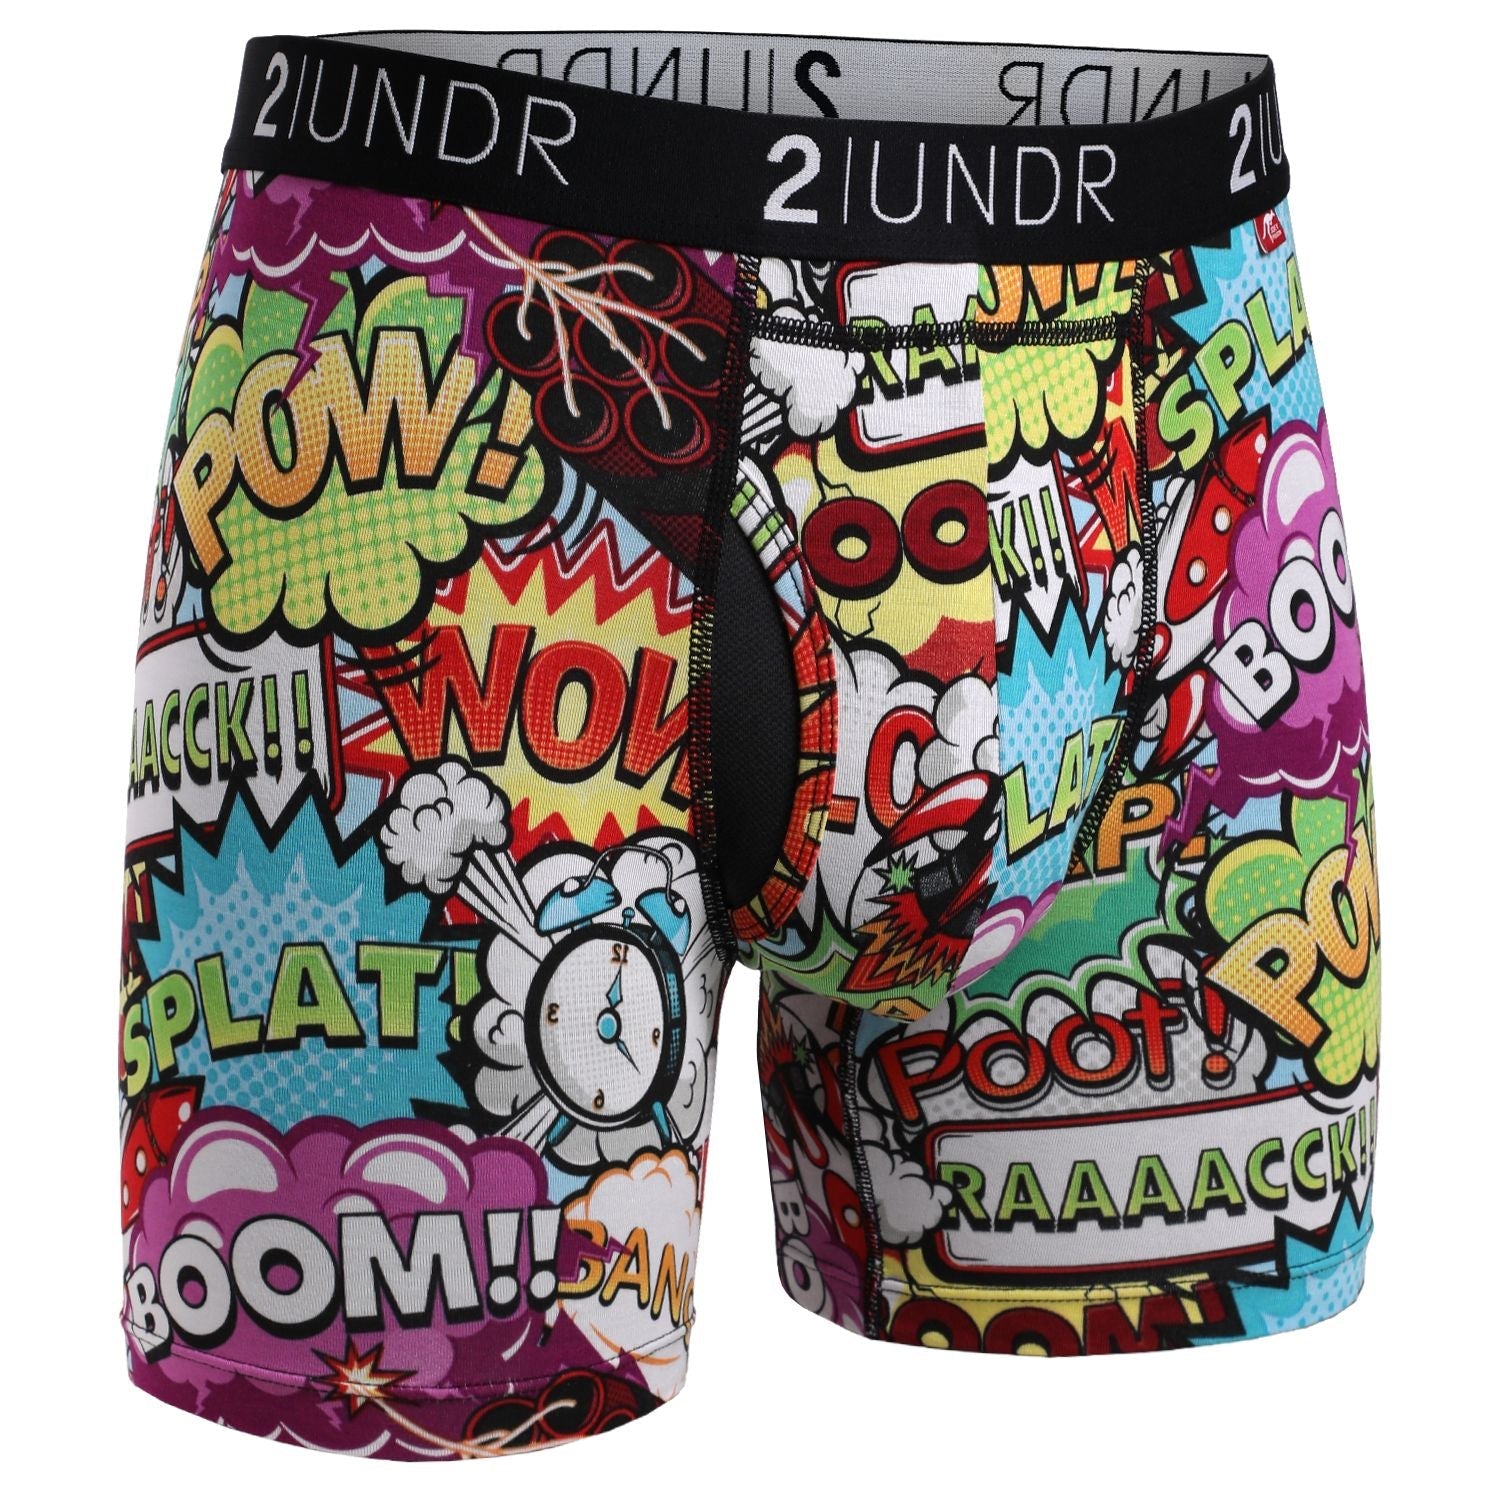 2Undr Swing Shift Boxer Brief Prints - Boom Time - My Filosophy